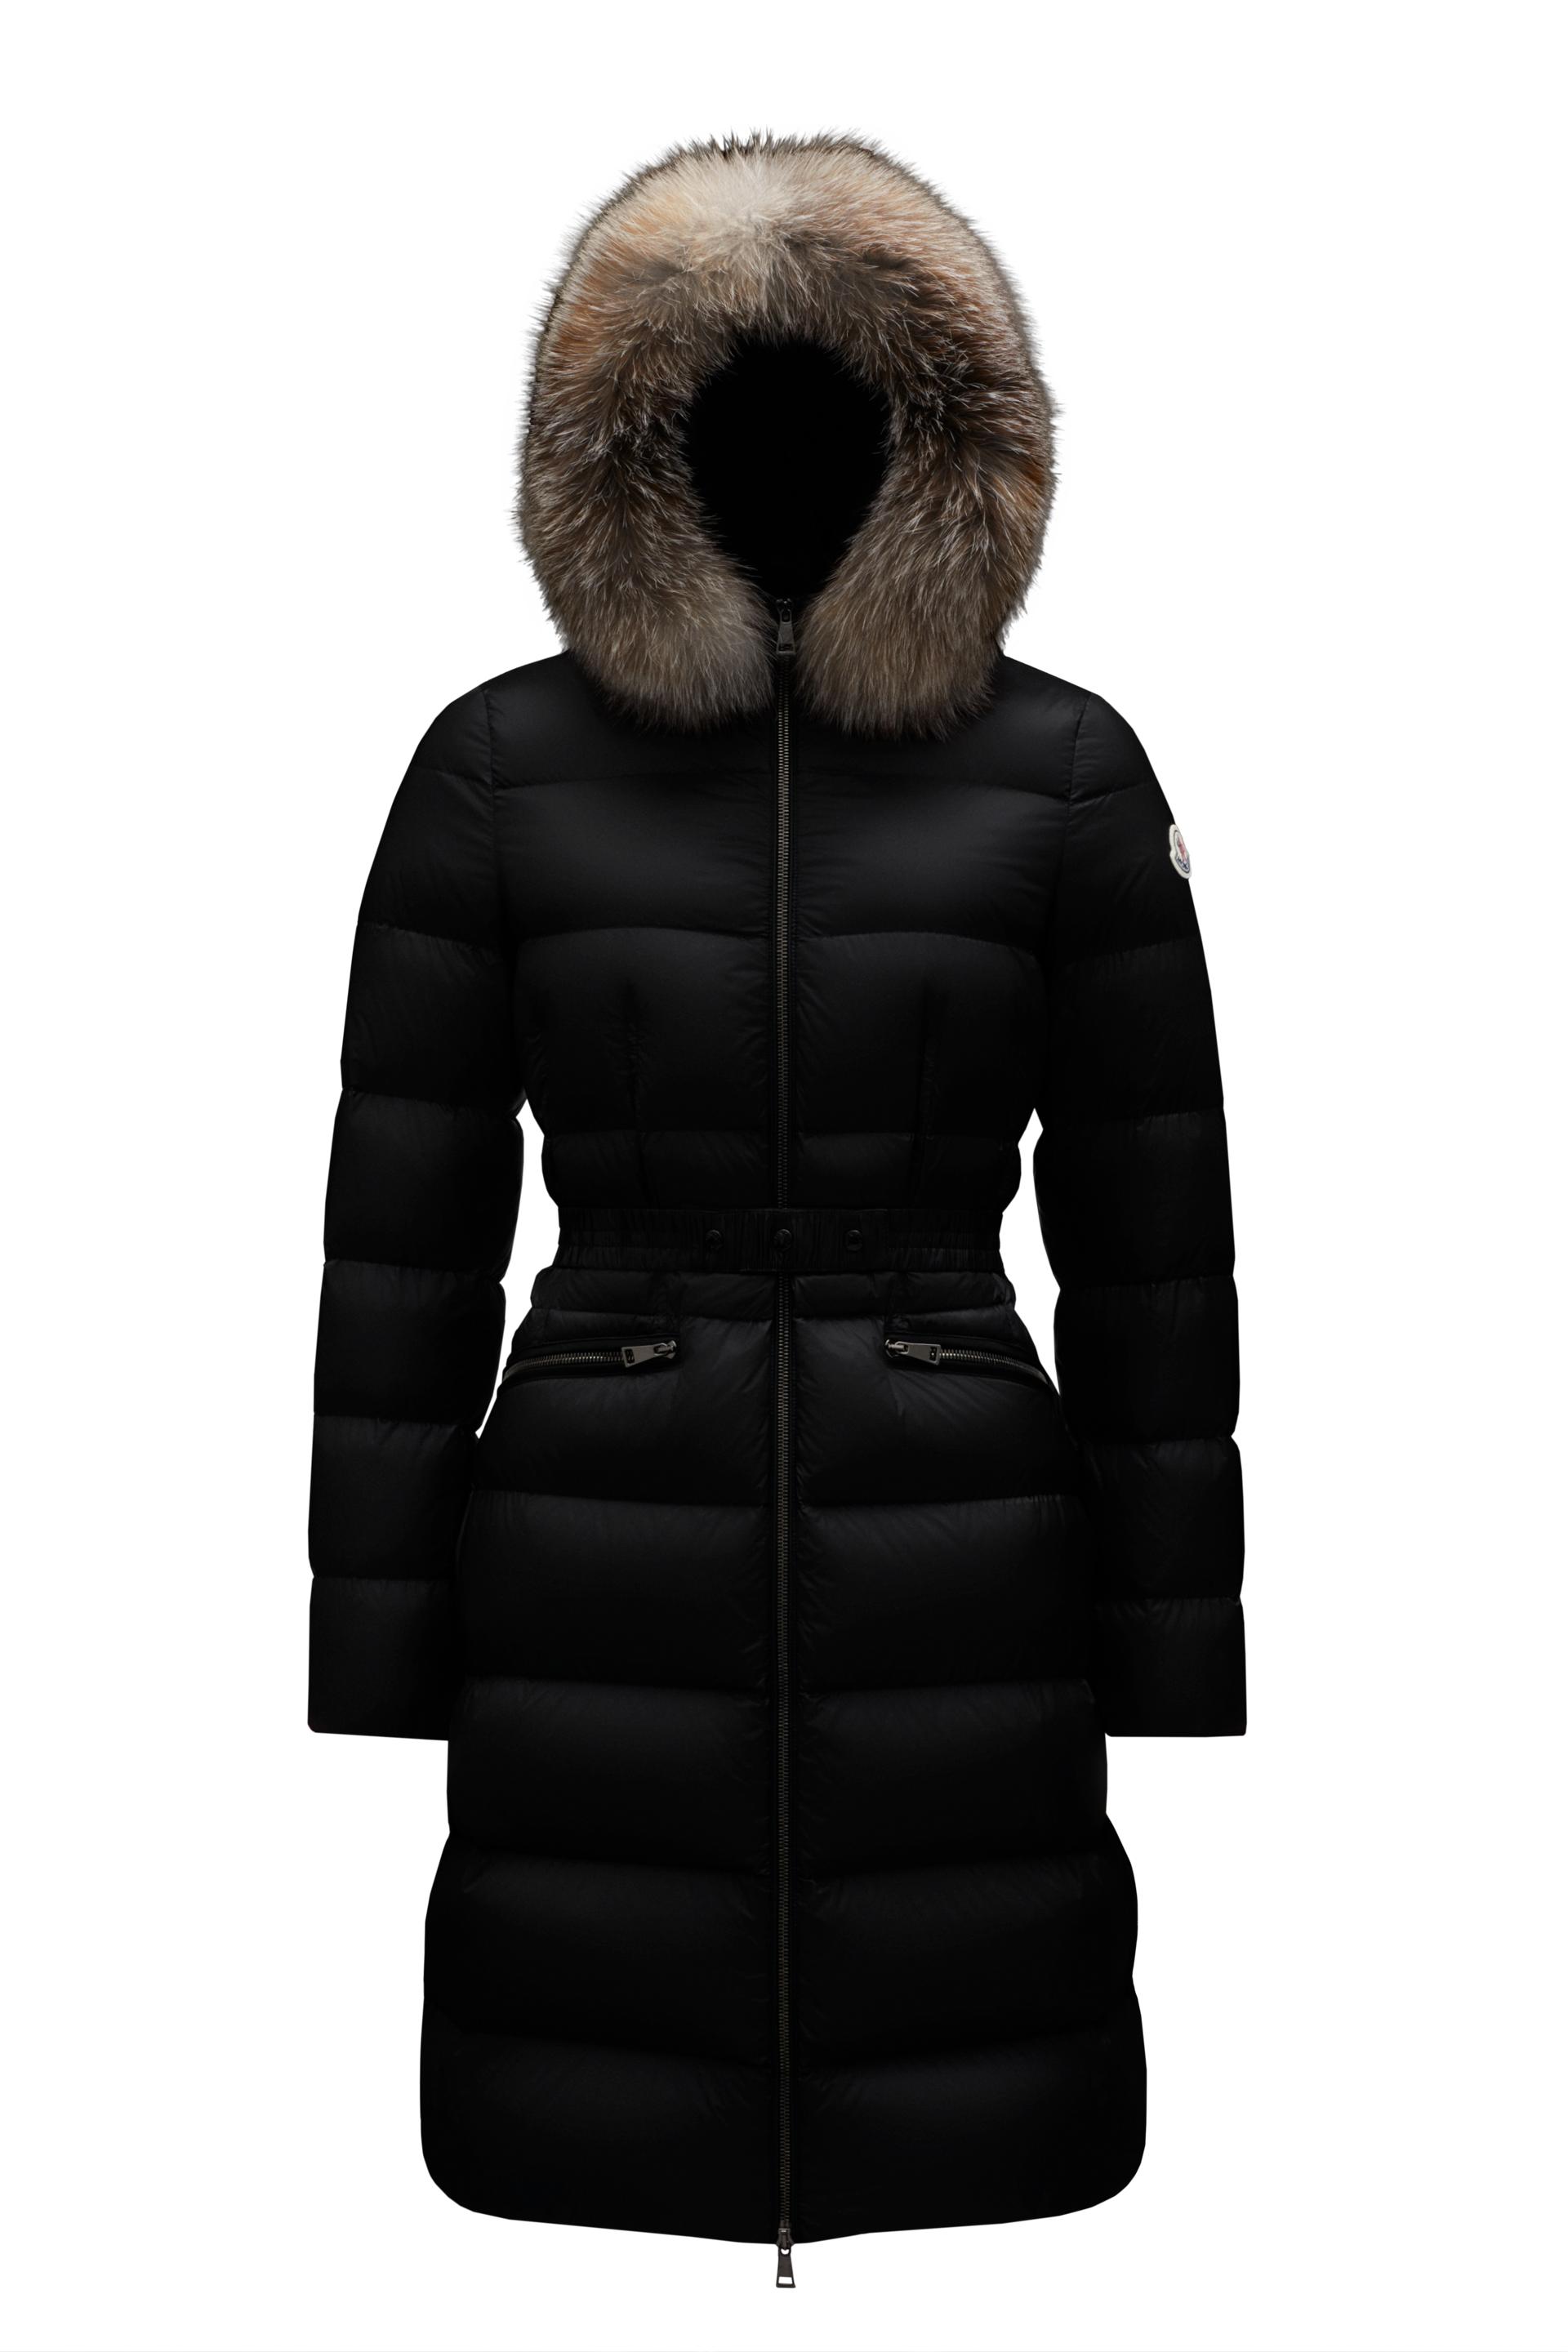 Moncler Synthetic Boedic Long Down Jacket in Black - Lyst